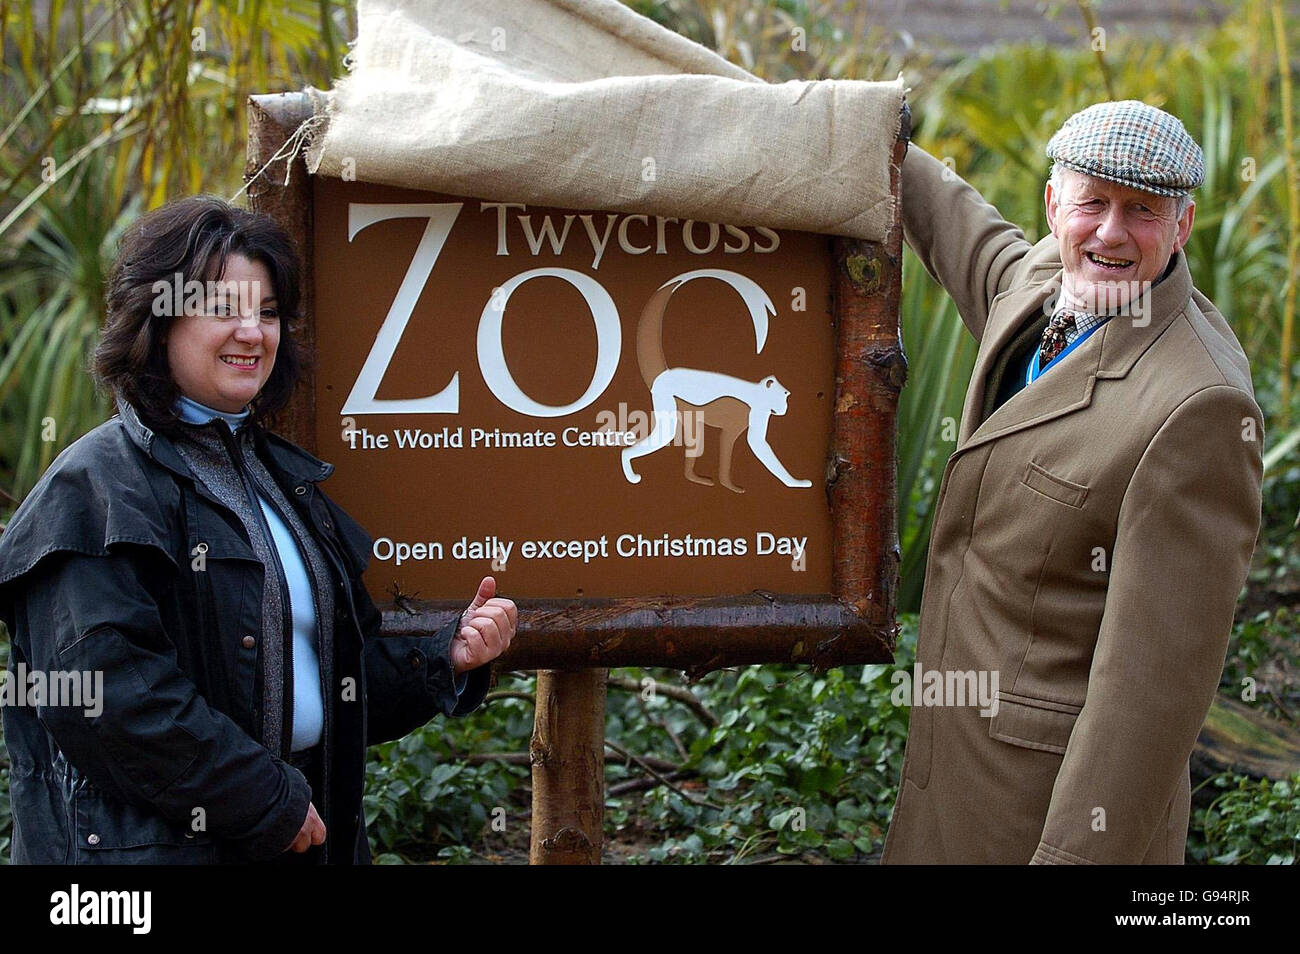 Twycross Zoo's Chairwoman Suzanne Boardman and the Sheriff of Leicestershire James Buxton unveil the new branding as it is officially announced Tuesday February 21, 2006, as a 'World Primate Centre'. Twycross Zoo has the largest collection of monkey and ape species in the world and is officially announced today as a 'World Primate Centre'. PRESS ASSOCIATION Photo. Photo credit should read: Rui Vieira/PA. Stock Photo